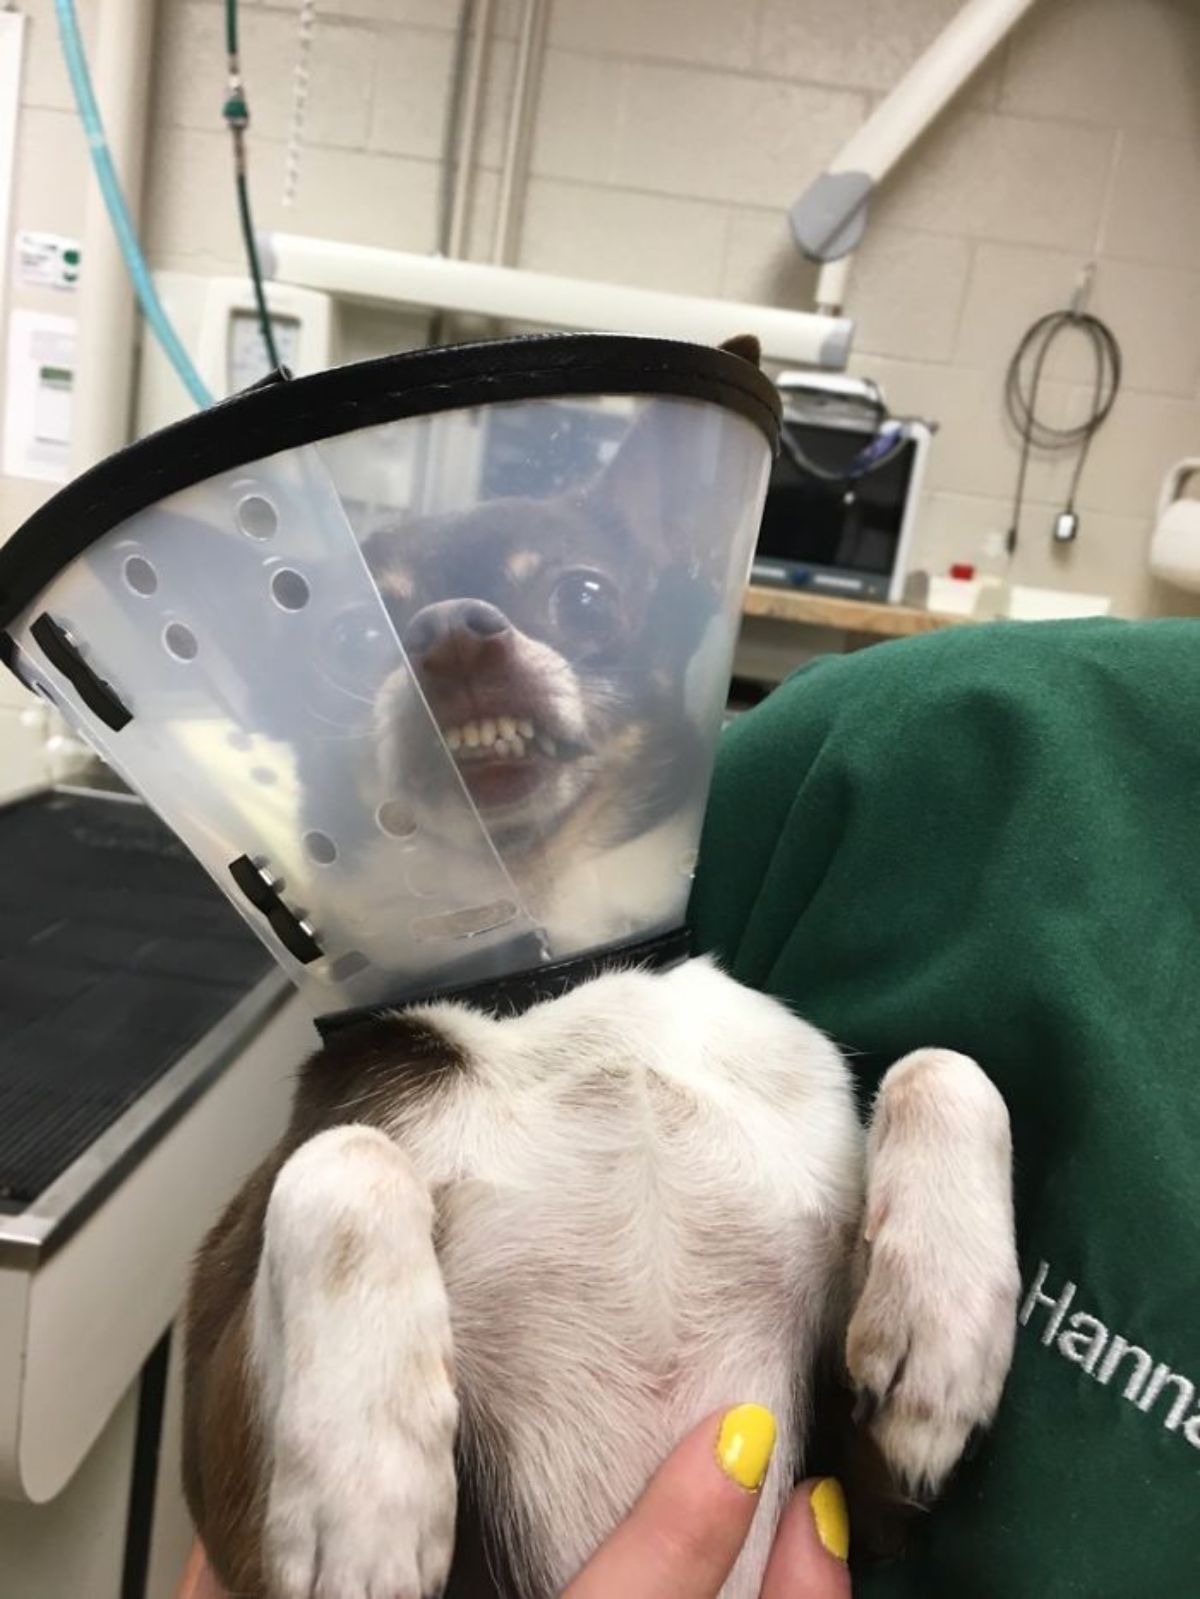 brown and white chihuahua wearing a transparent cone of shame being held by someoen and the dog's teeth are showing